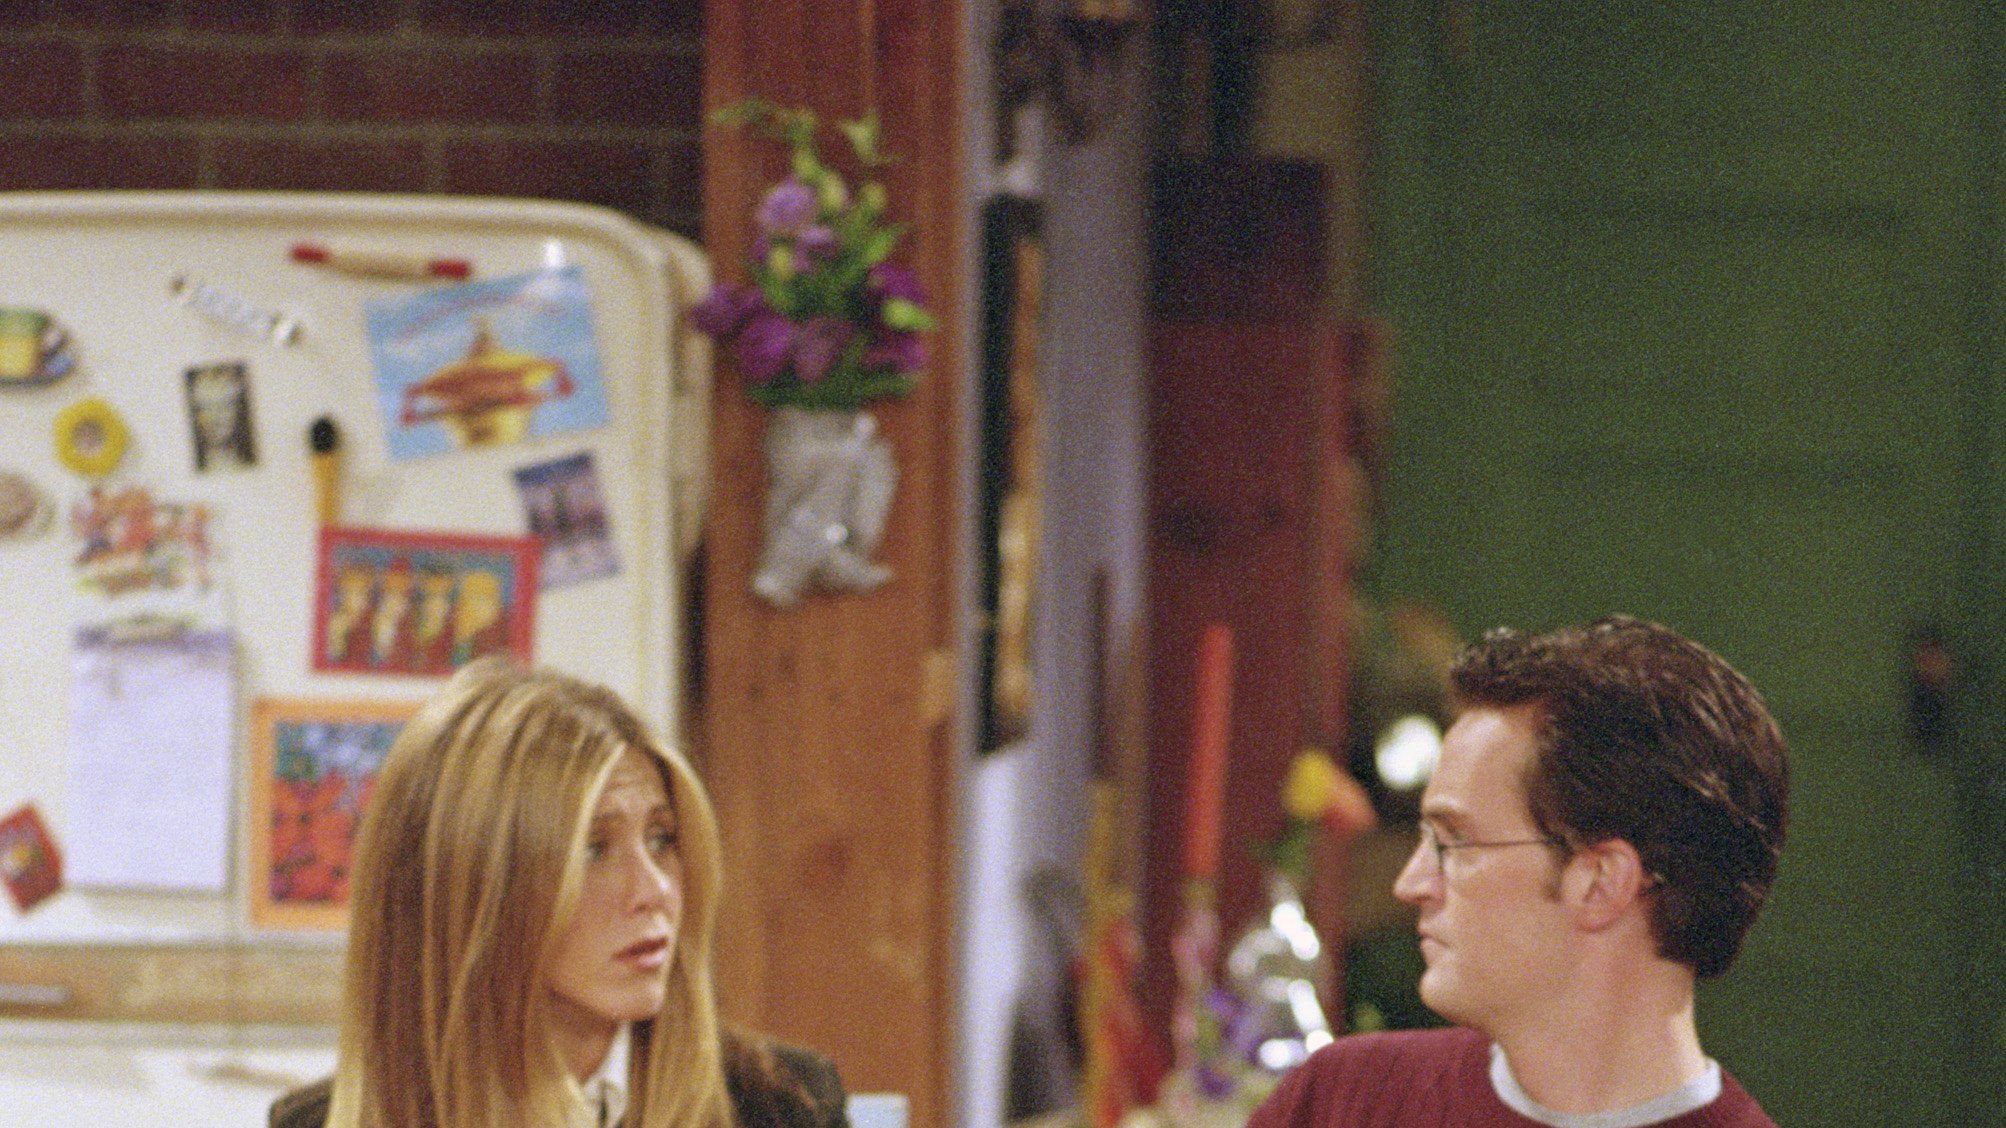 Can You Guess The 'Friends' Season Based On Rachel's Hair?